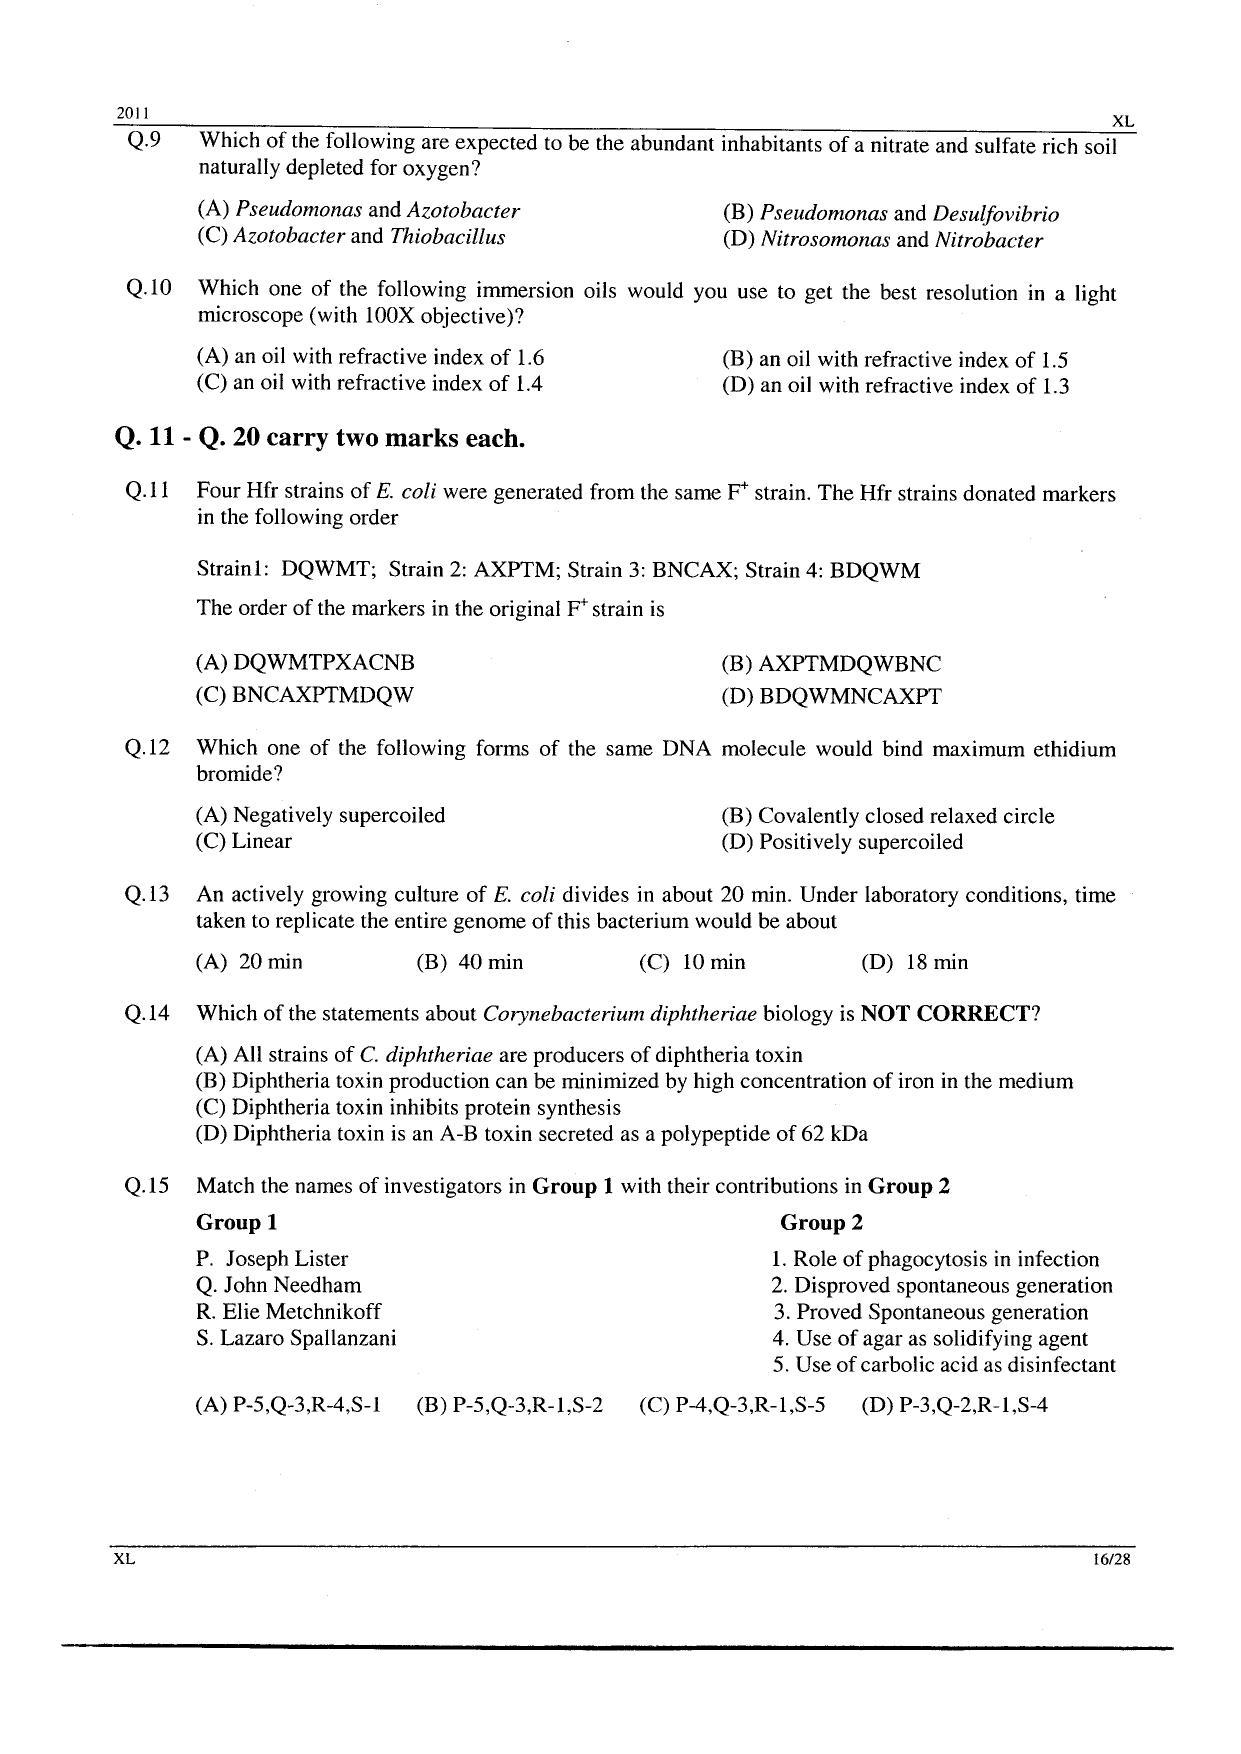 GATE 2011 Life Sciences (XL) Question Paper with Answer Key - Page 16